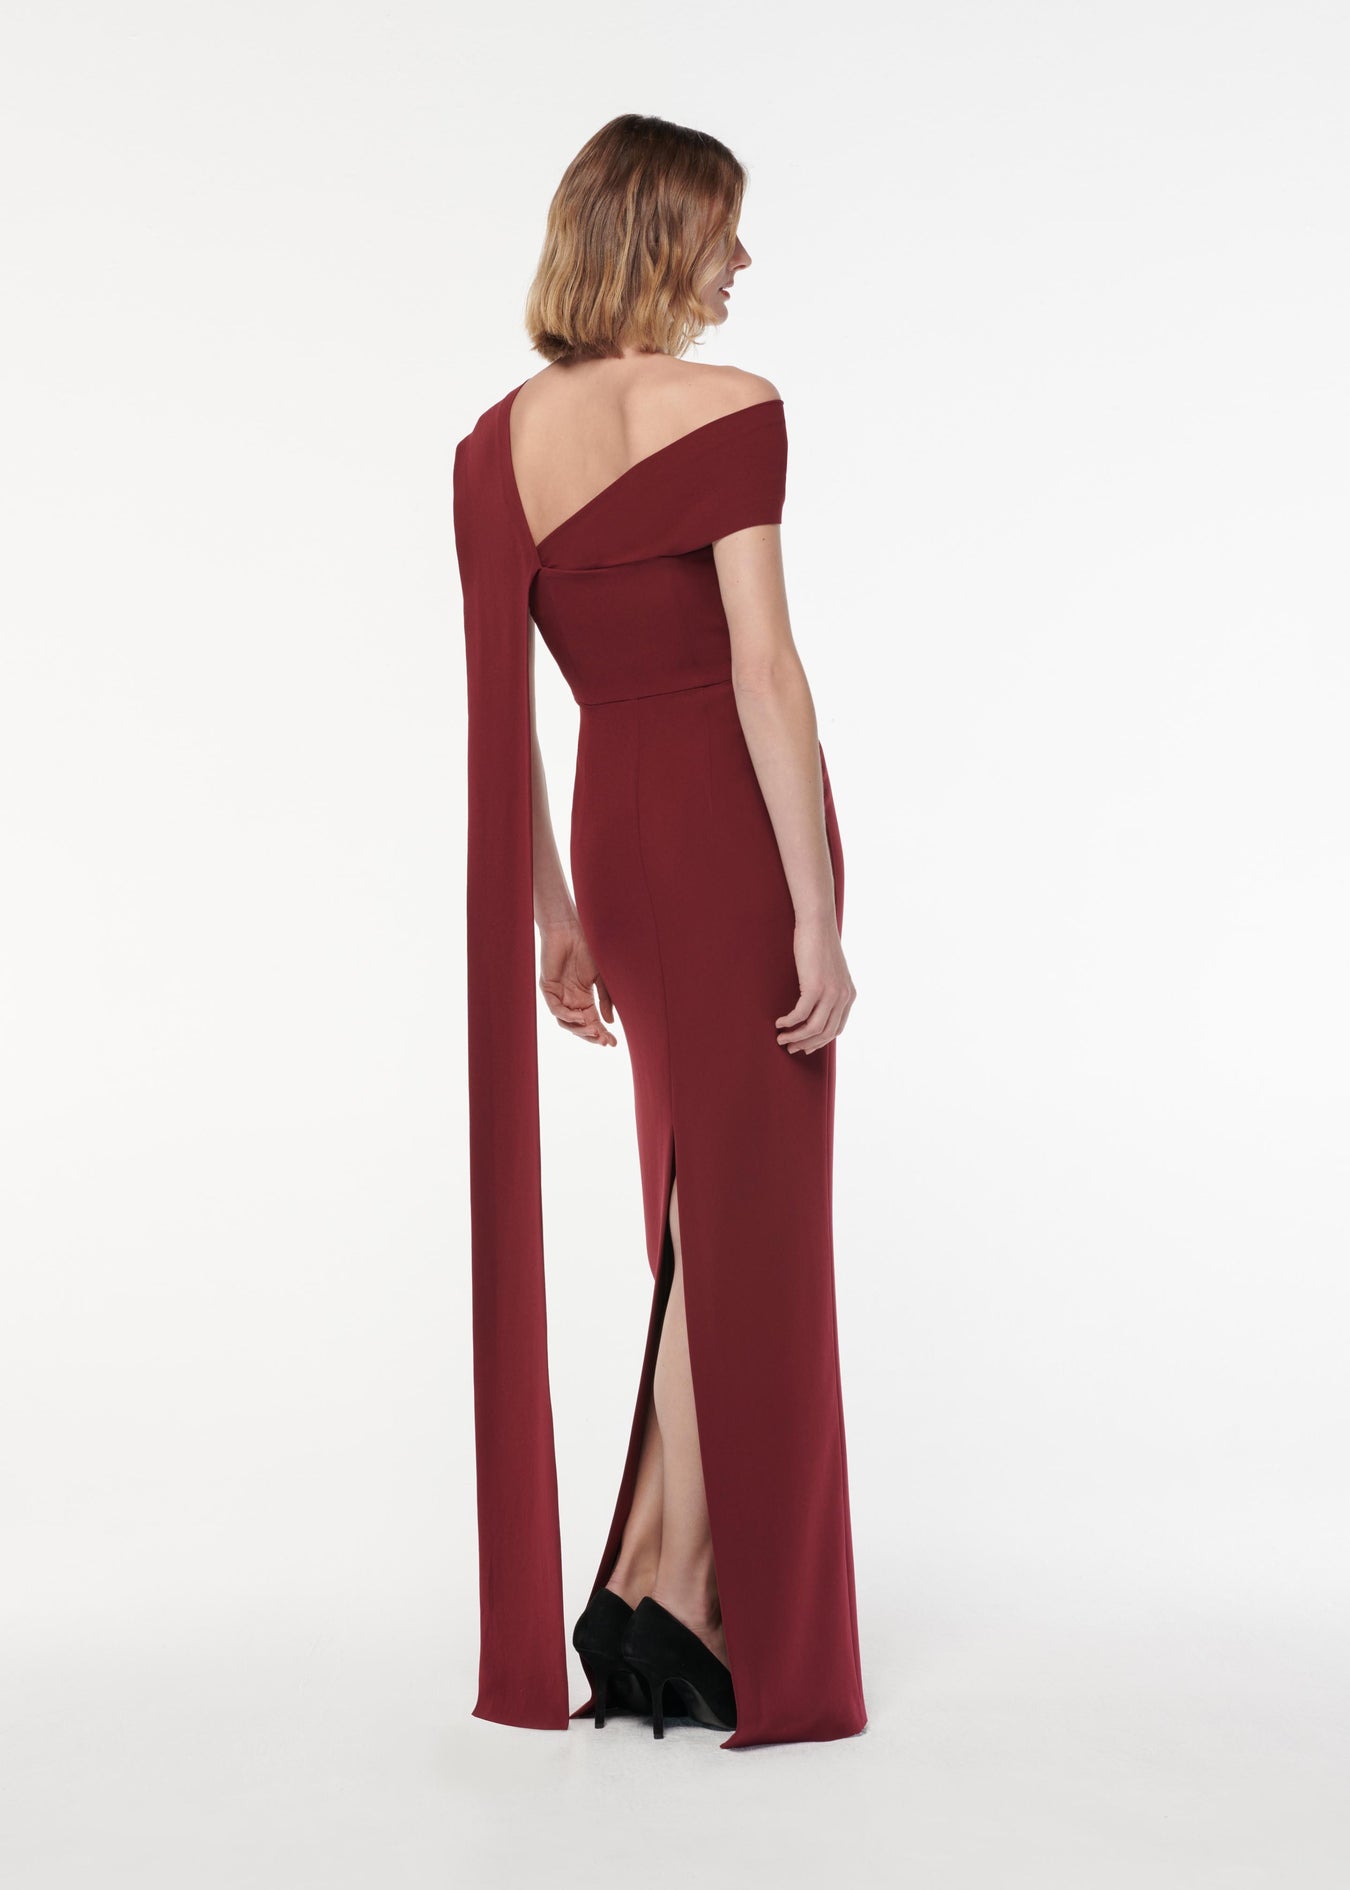 A photograph of a woman wearing aAsymmetric Light Cady Gown in Burgundy